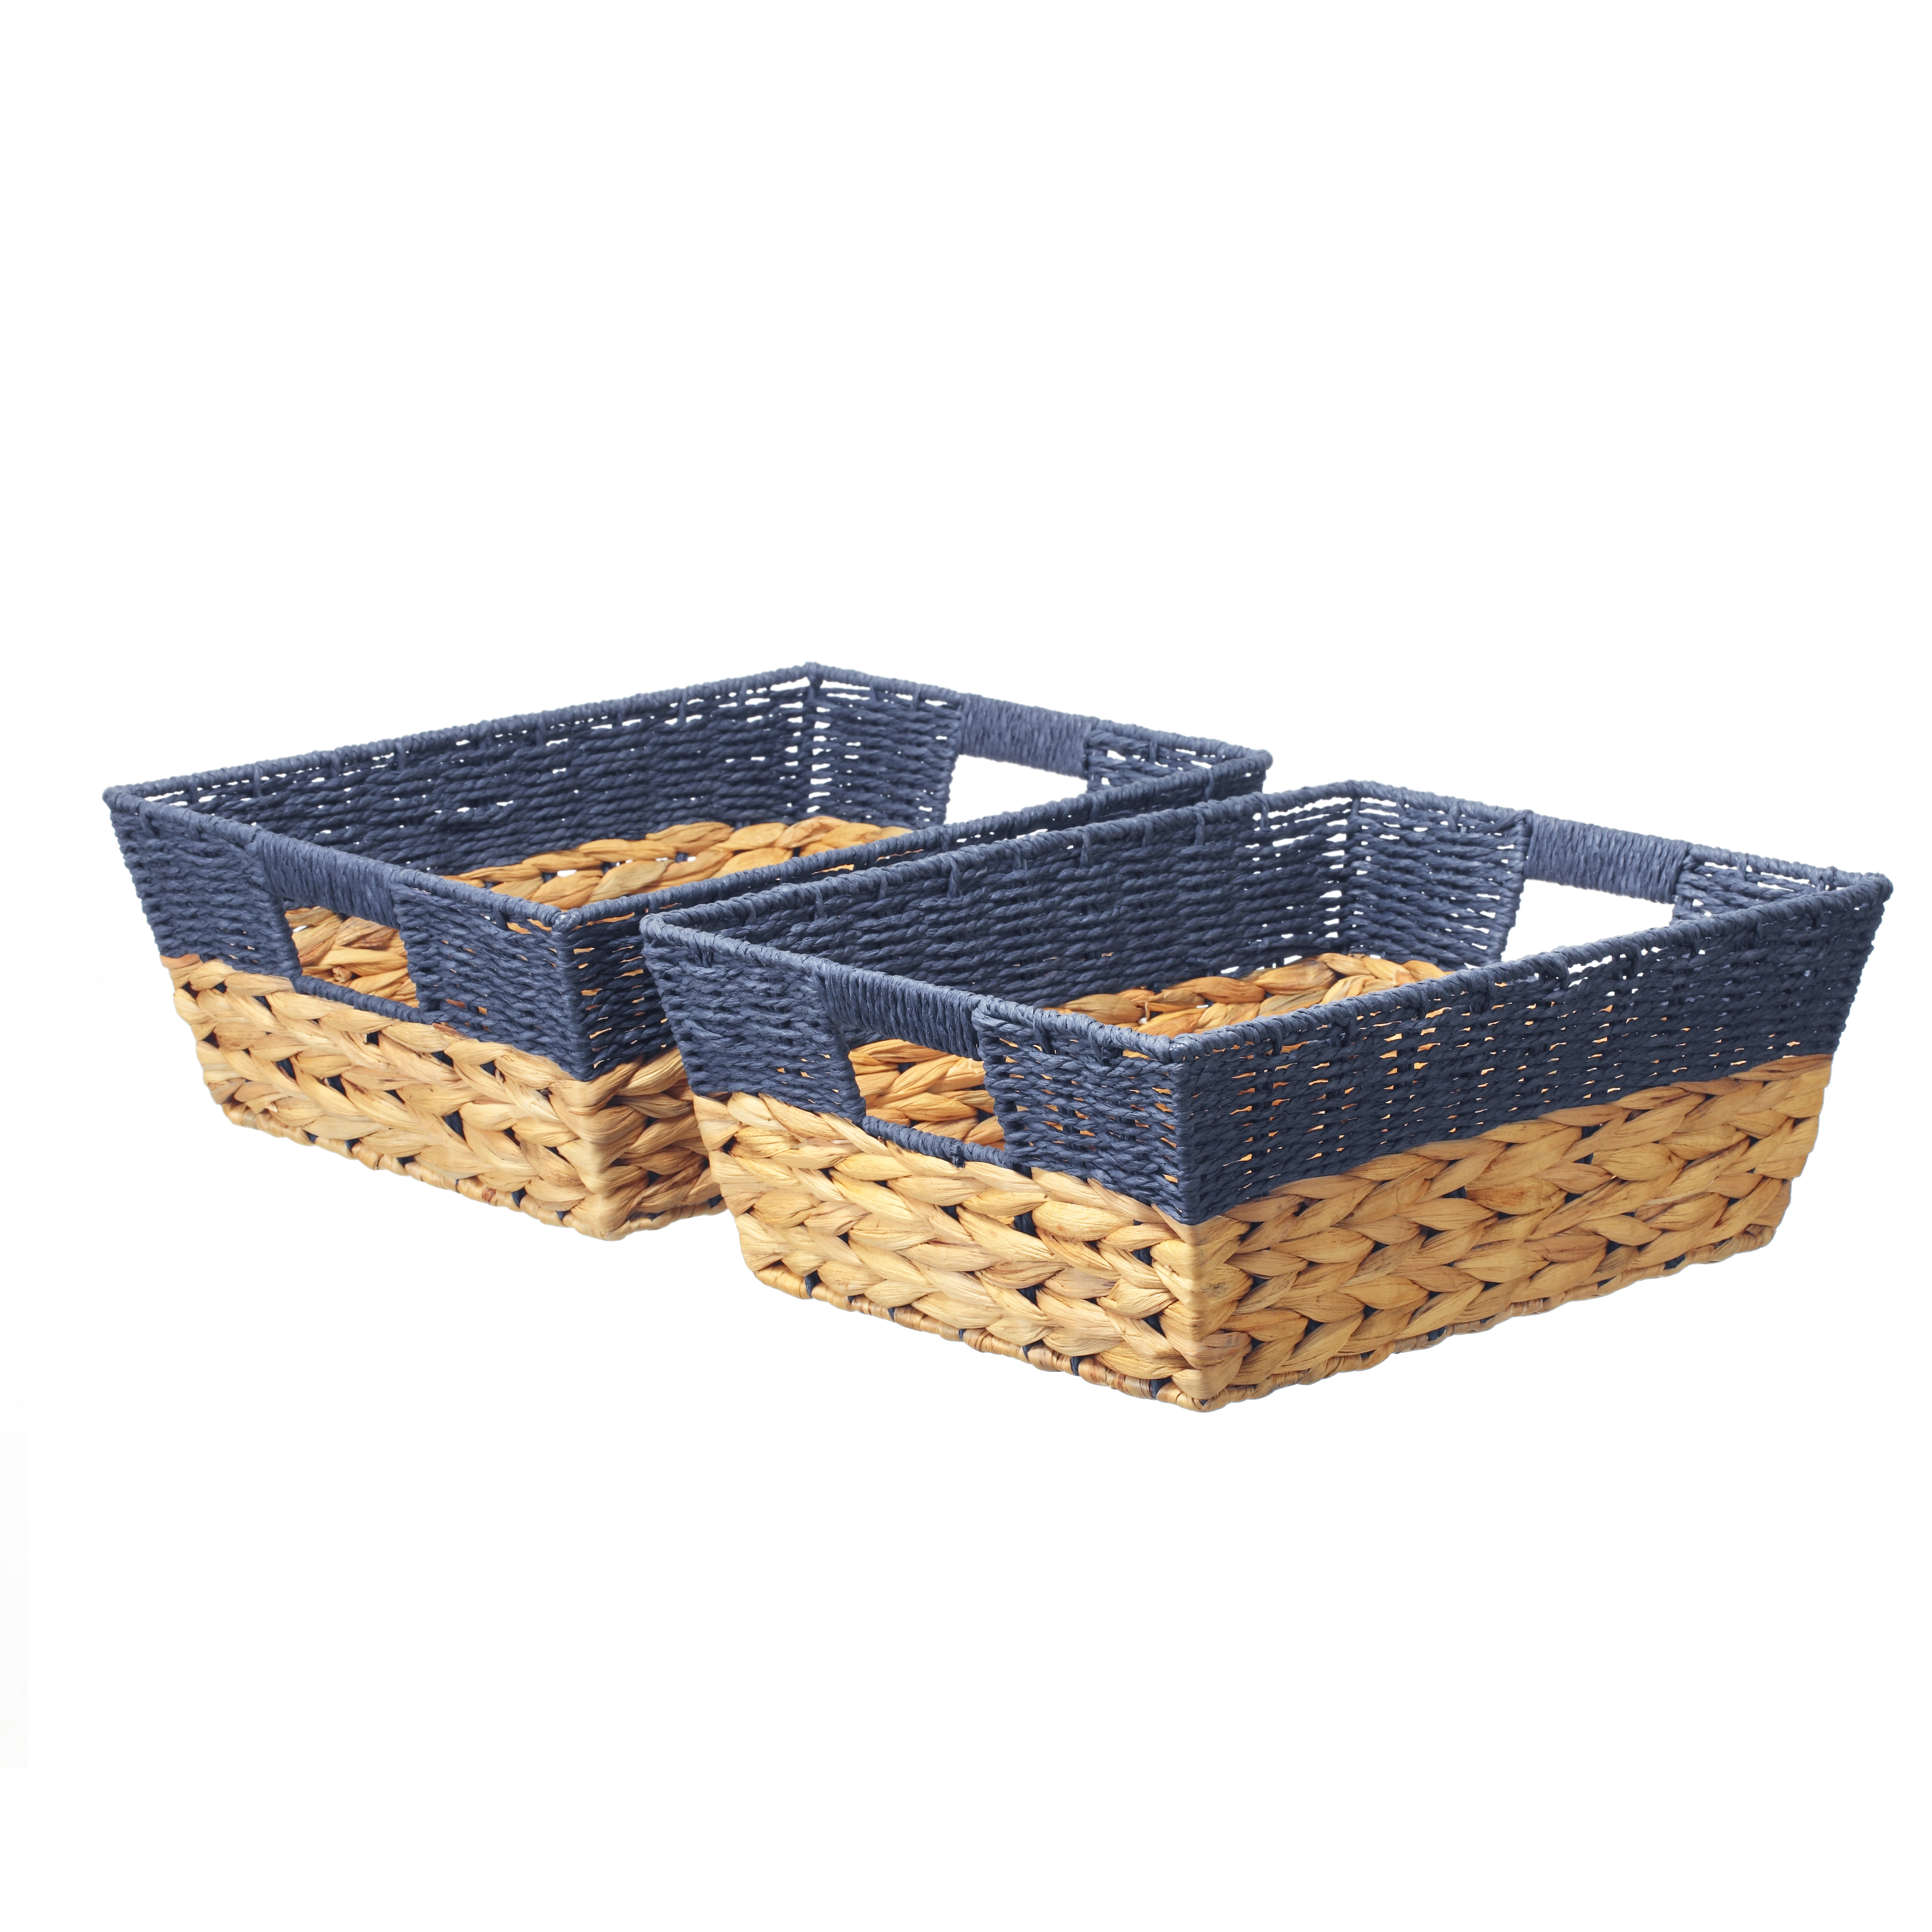 3compartments Travel With Lid Bedroom DVDs Woven Storage Basket Home Organizer